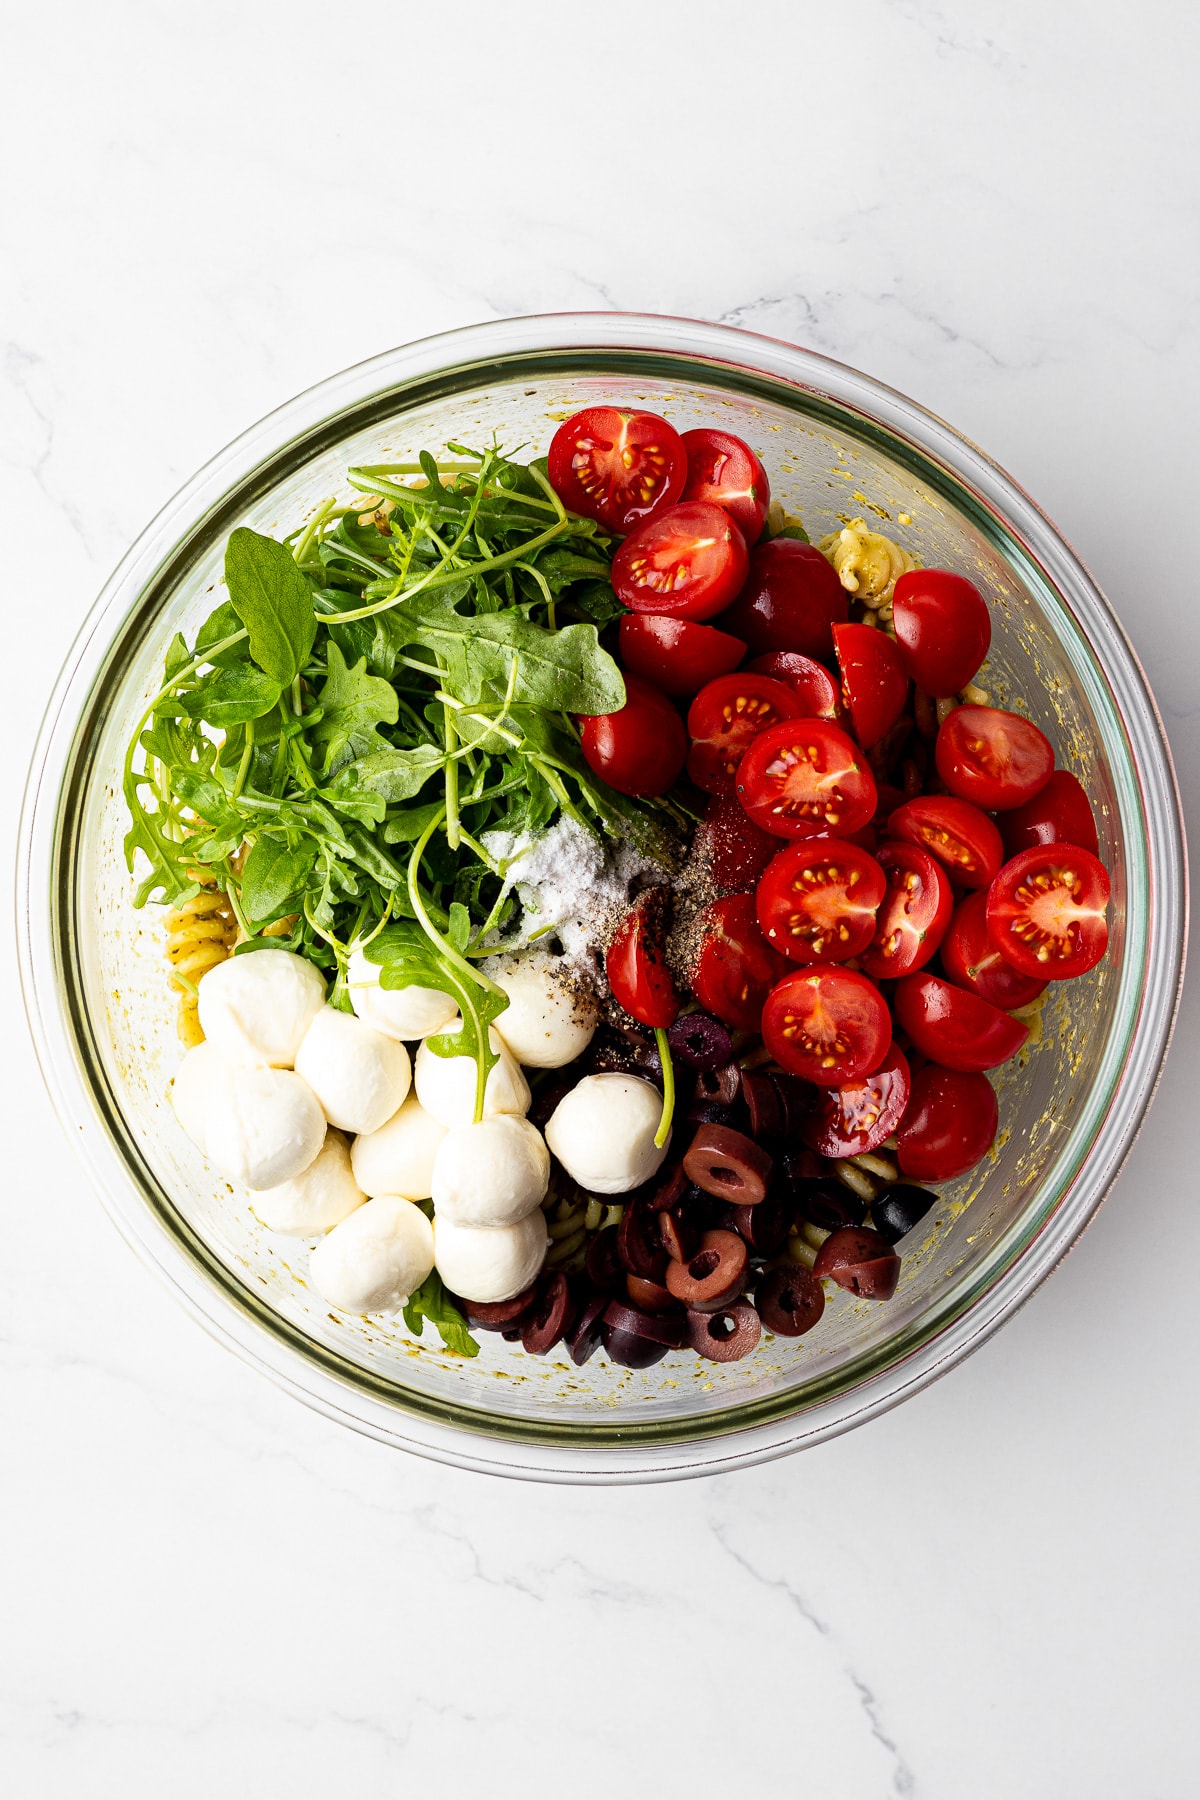 all pesto caprese pasta salad ingredients in a bowl before mixing everything